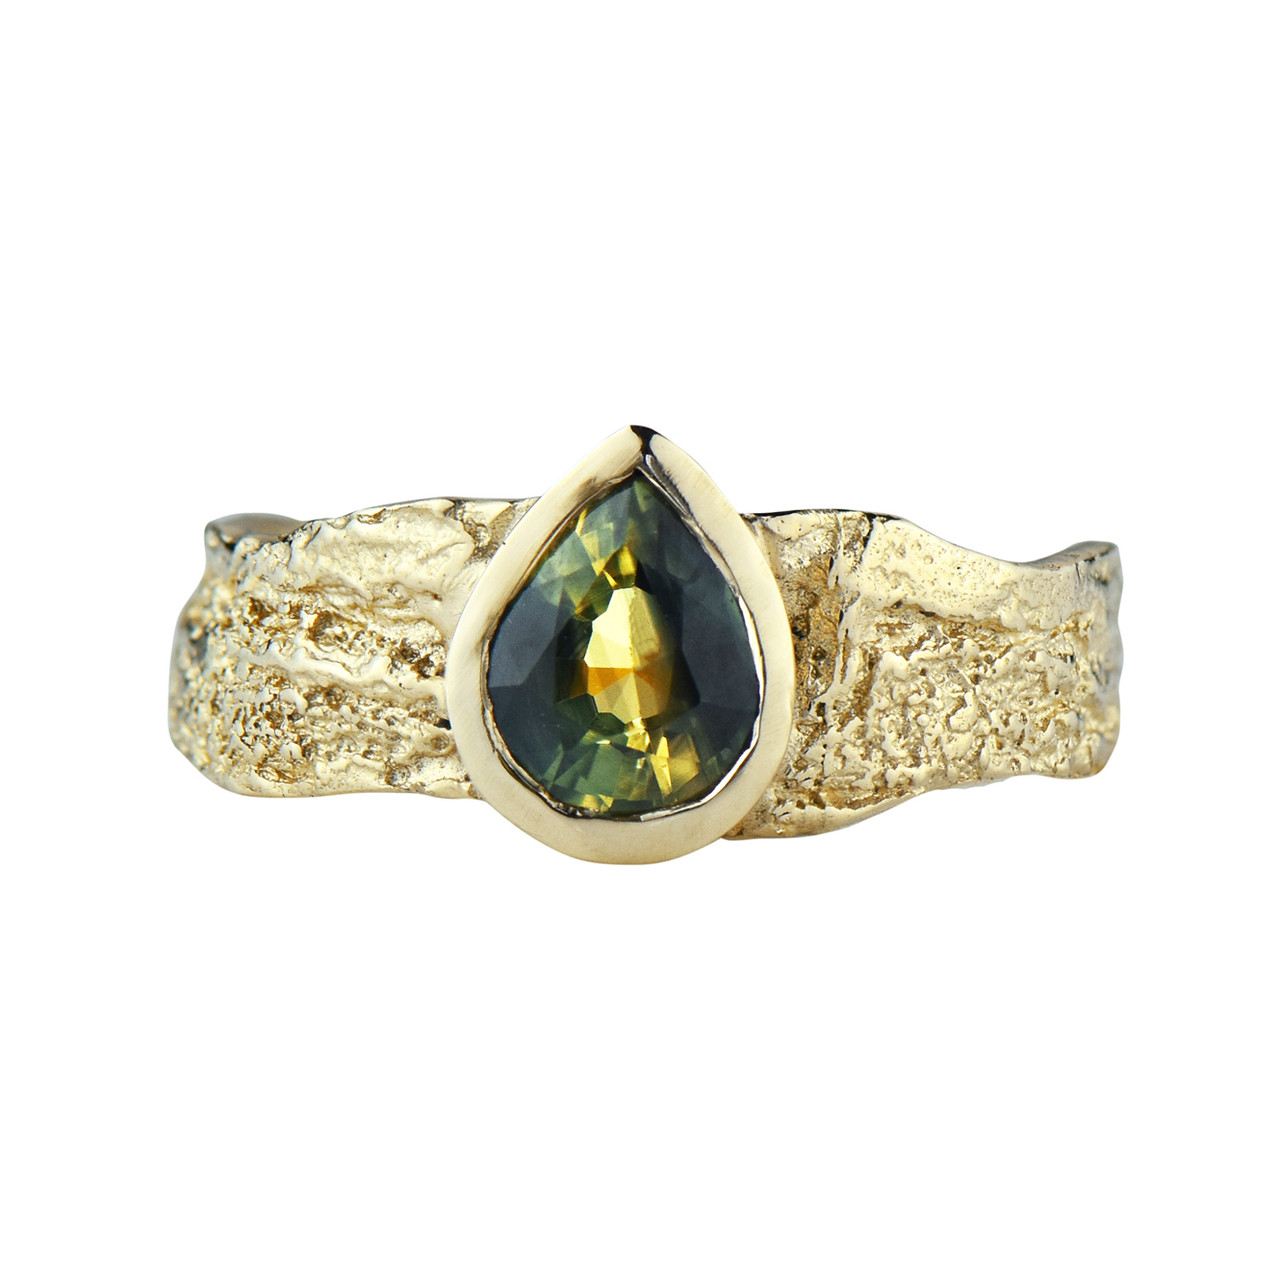 Gold & Green Montana Sapphire Wide London Plane Ring, Issy White, tomfoolery